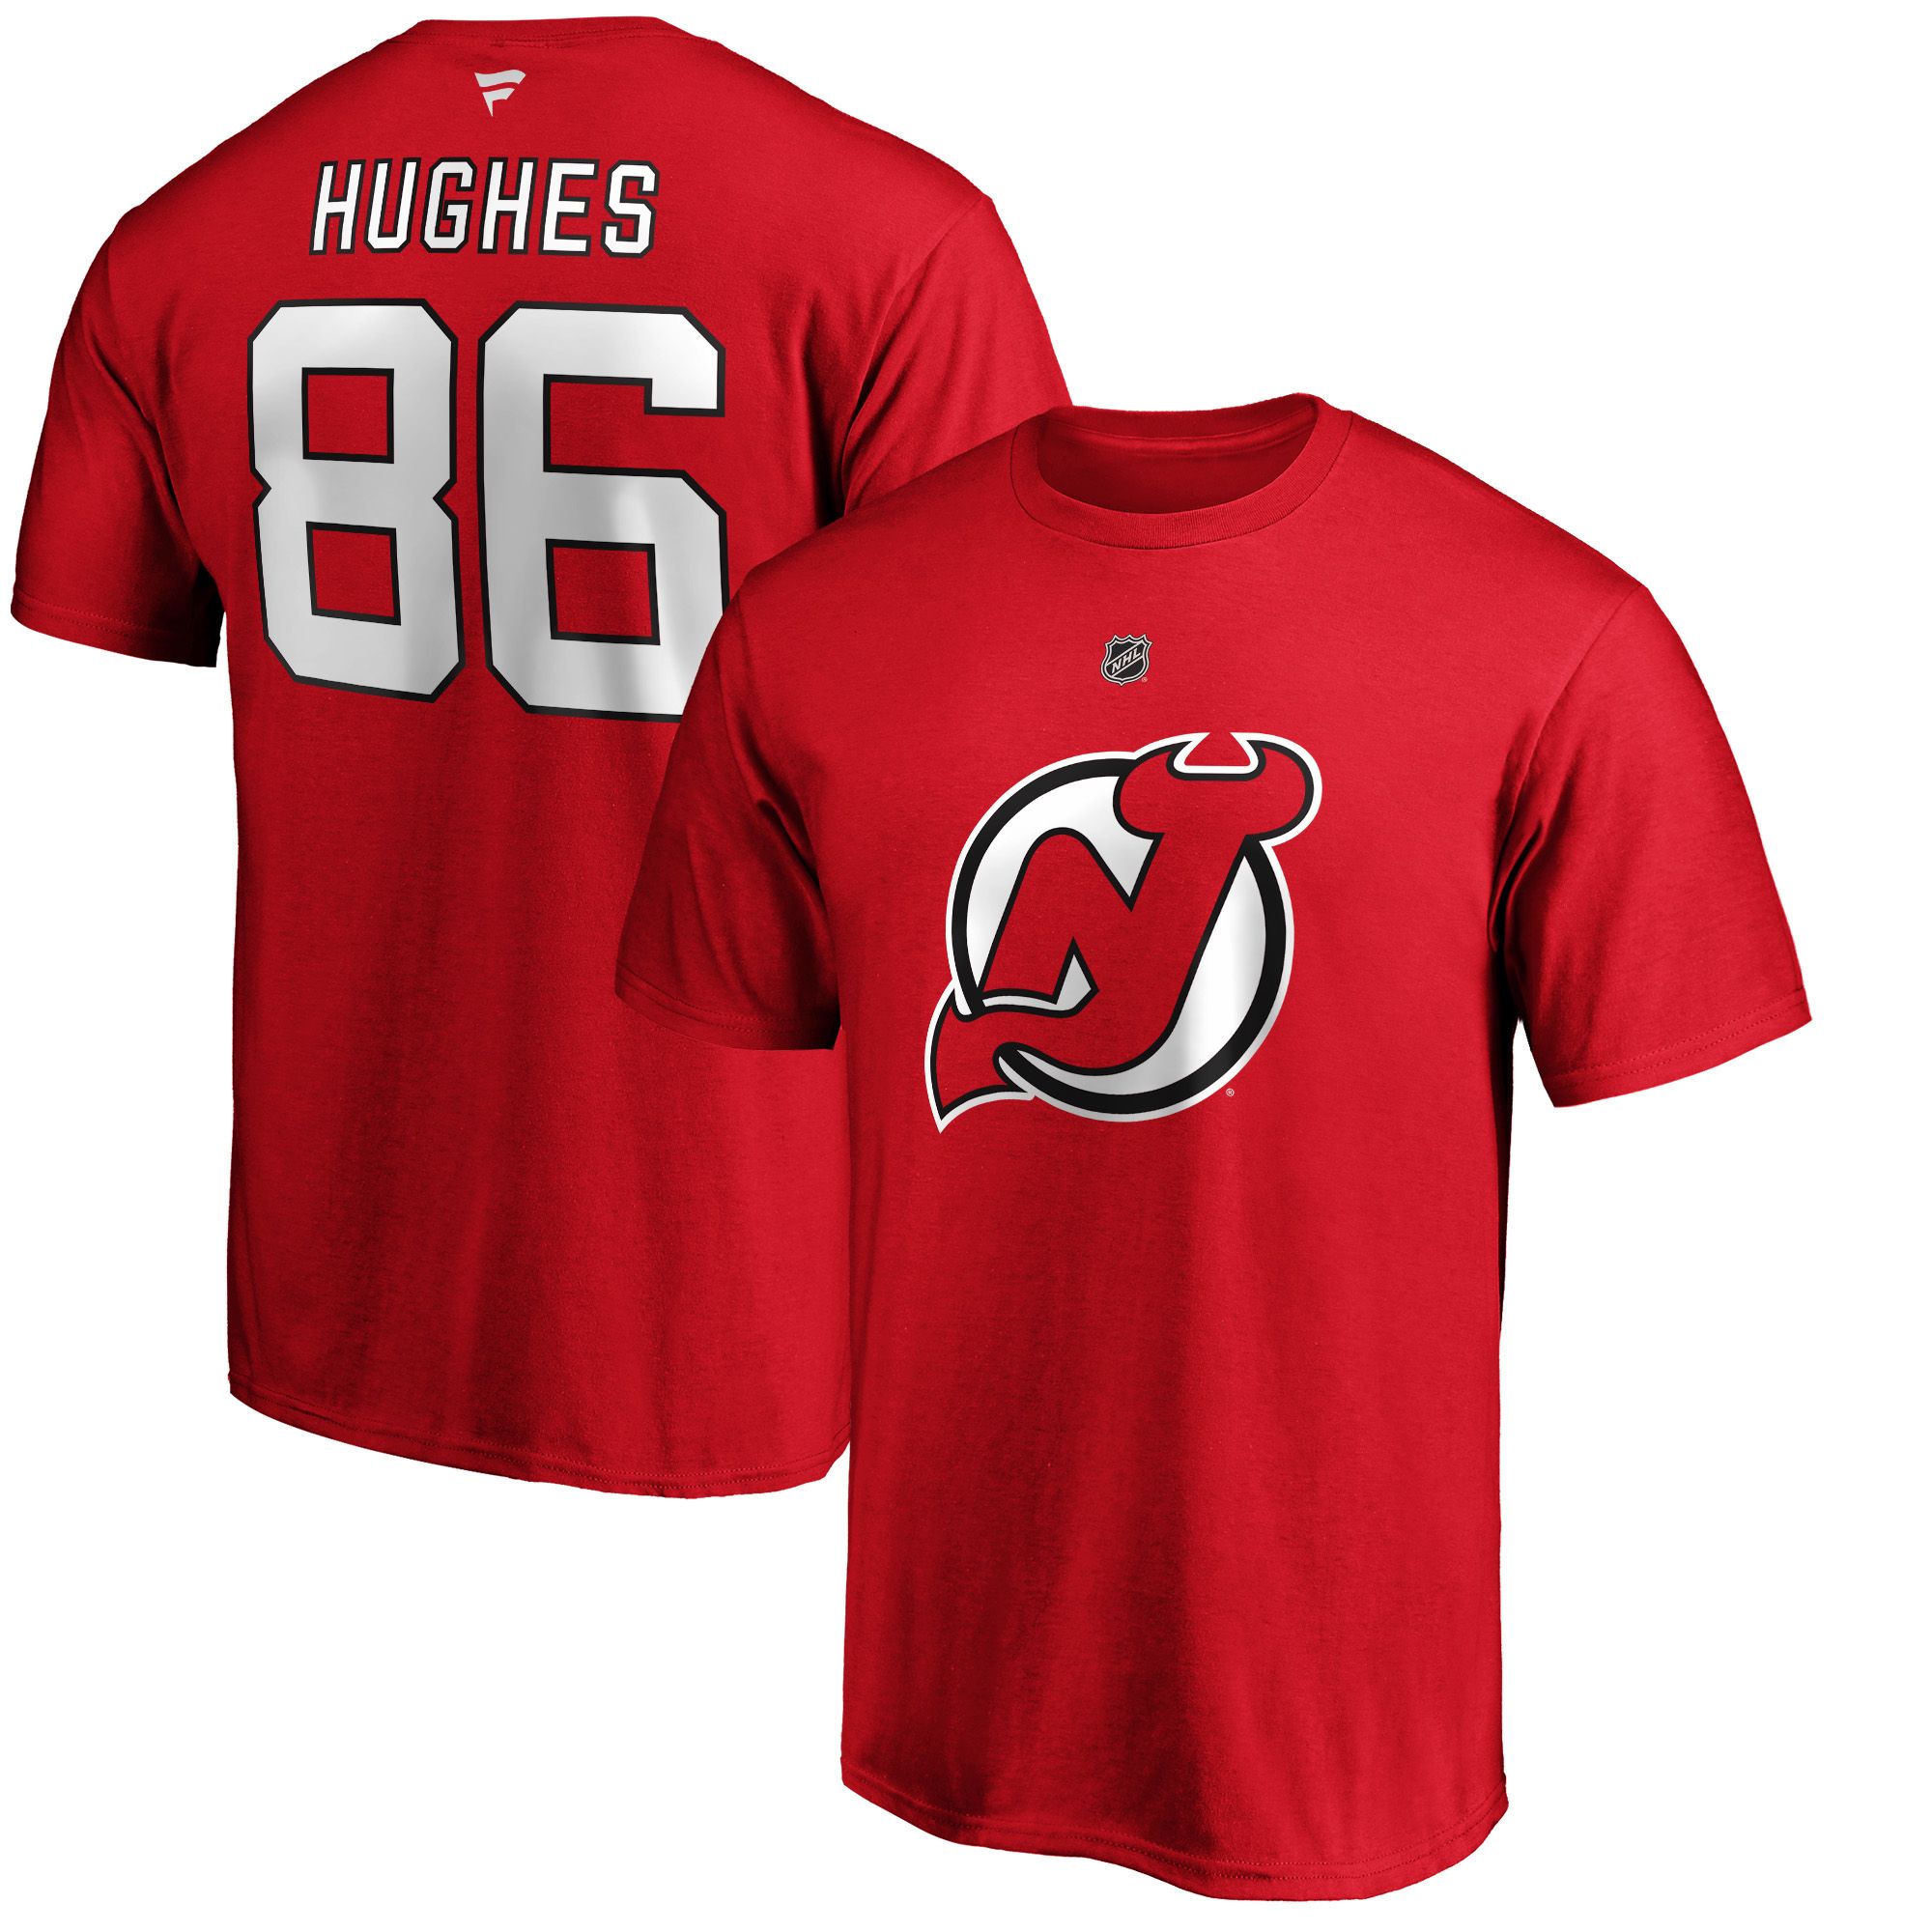 Jack Hughes Jerseys & Gear  Curbside Pickup Available at DICK'S